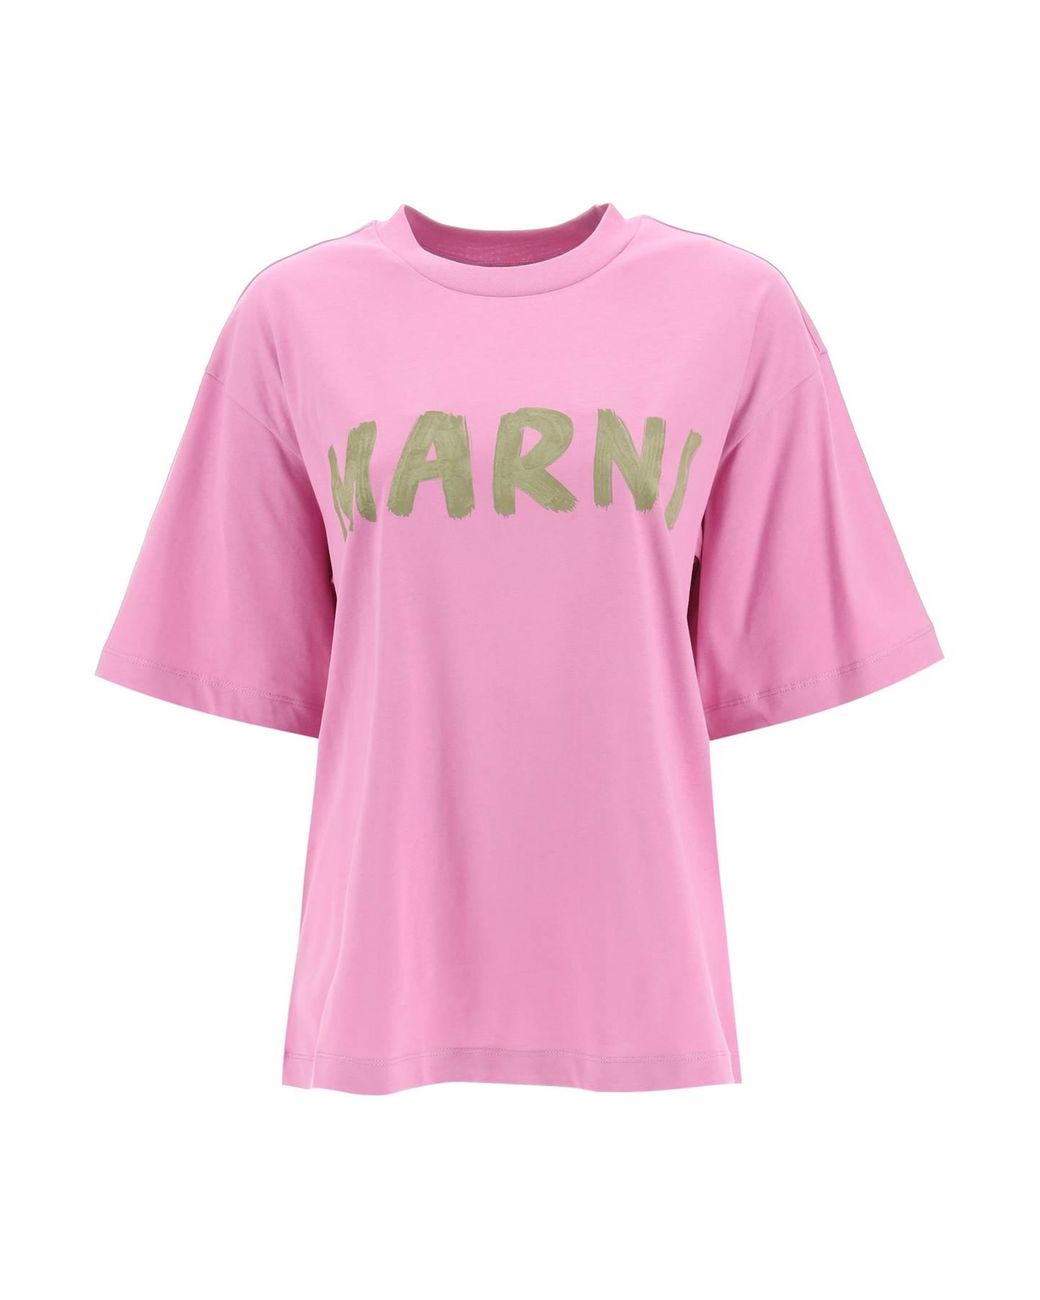 Oversized T-shirt with print COLOUR pastel pink - RESERVED - 4147S-03X